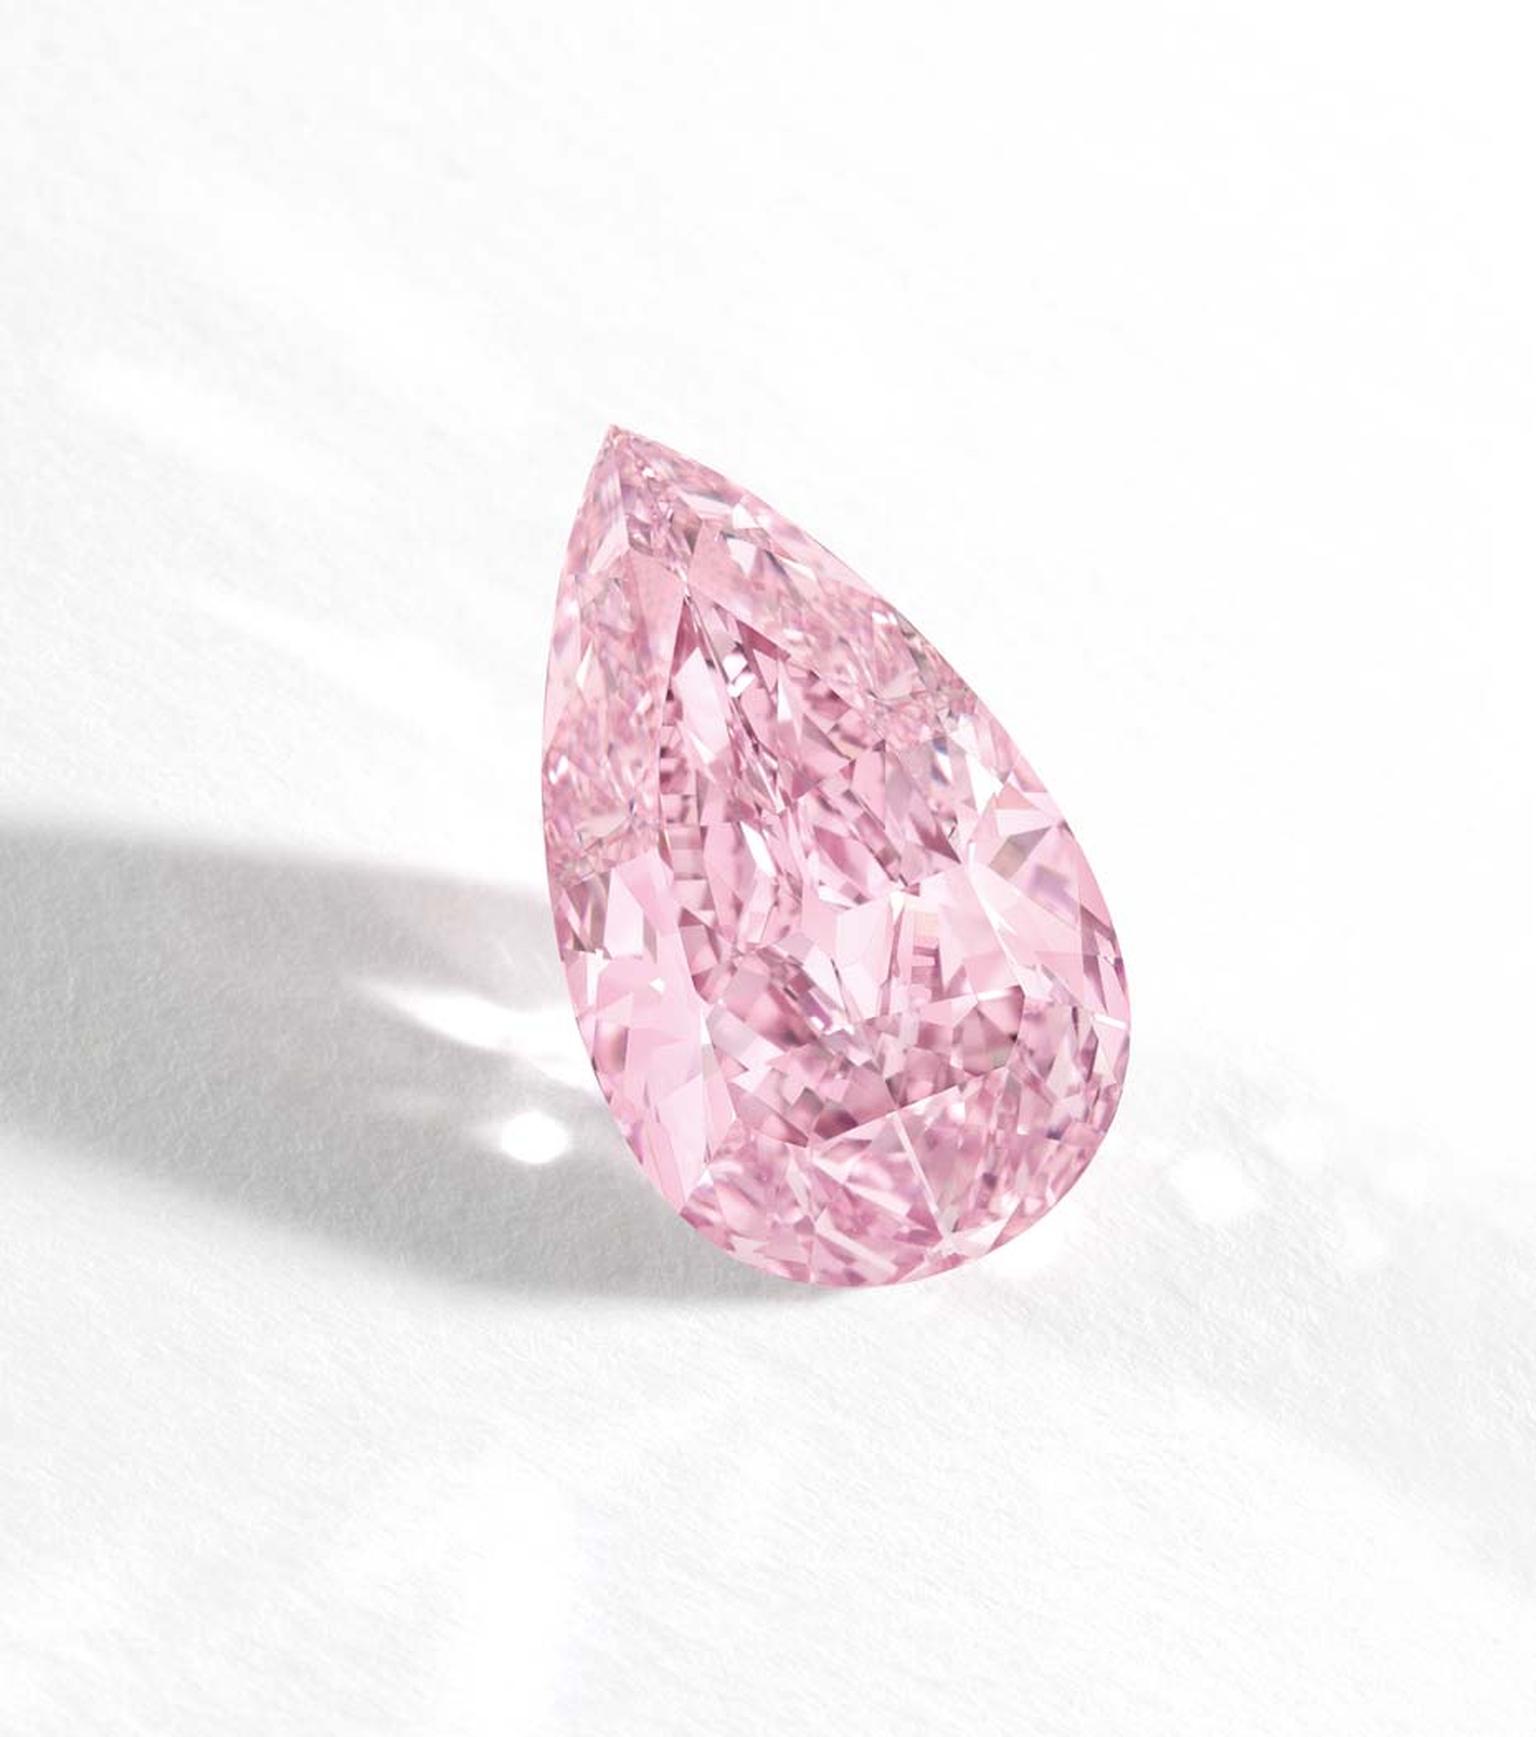 The highlight of Sotheby’s Hong Kong Magnificent Jewels and Jadeite Autumn Sale on 7 October 2014 is an Internally Flawless (IF) Fancy Vivid Purple-Pink Diamond, weighing in at 8.41 carats.